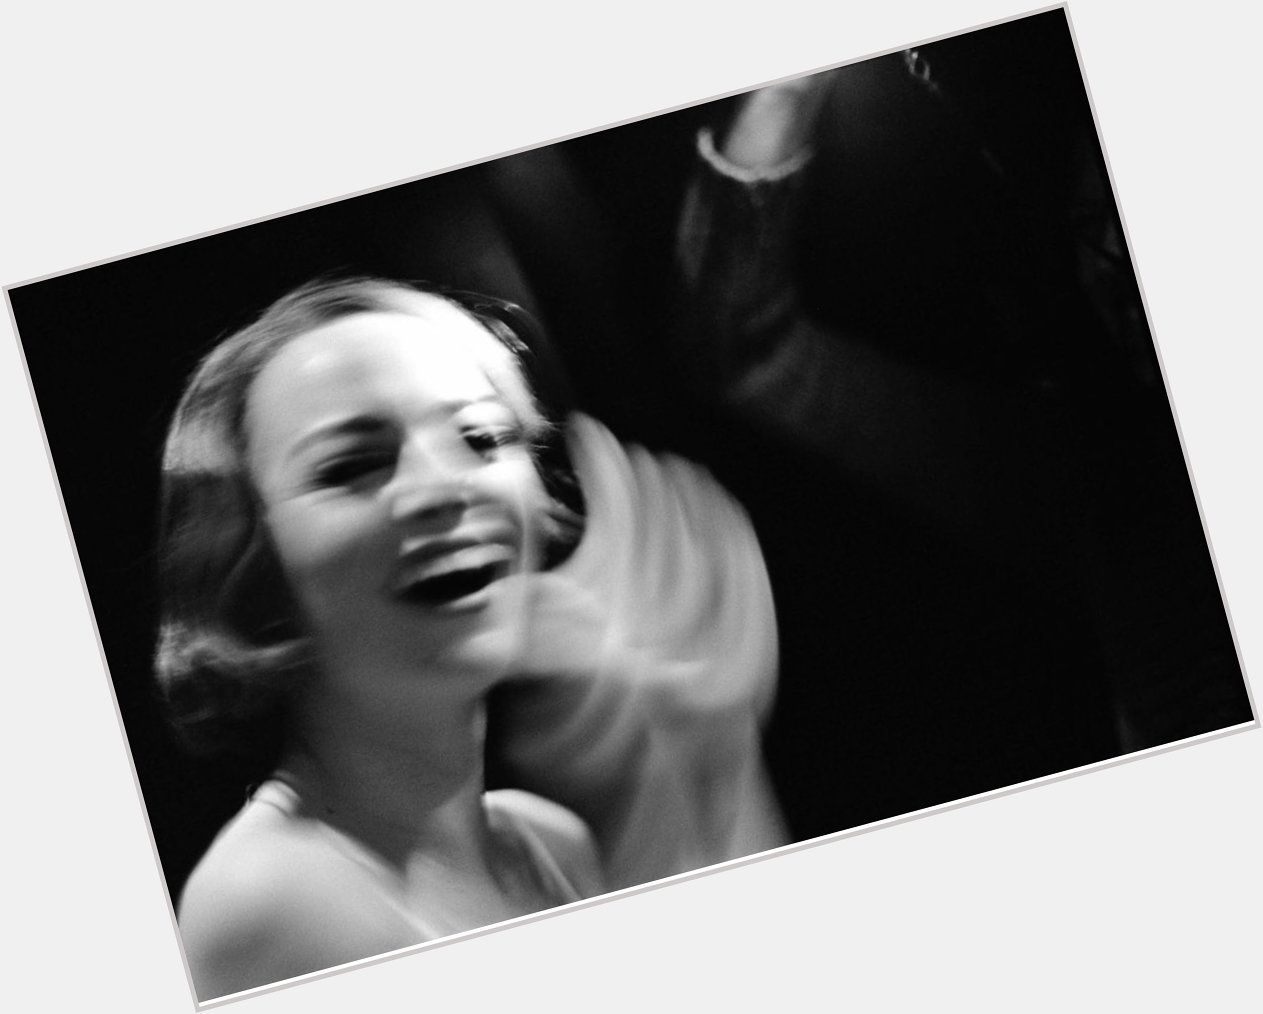  Quicky change backstage- cabaret// New York, 2014// Happy Birthday, Em  by chris Lowell on ig 